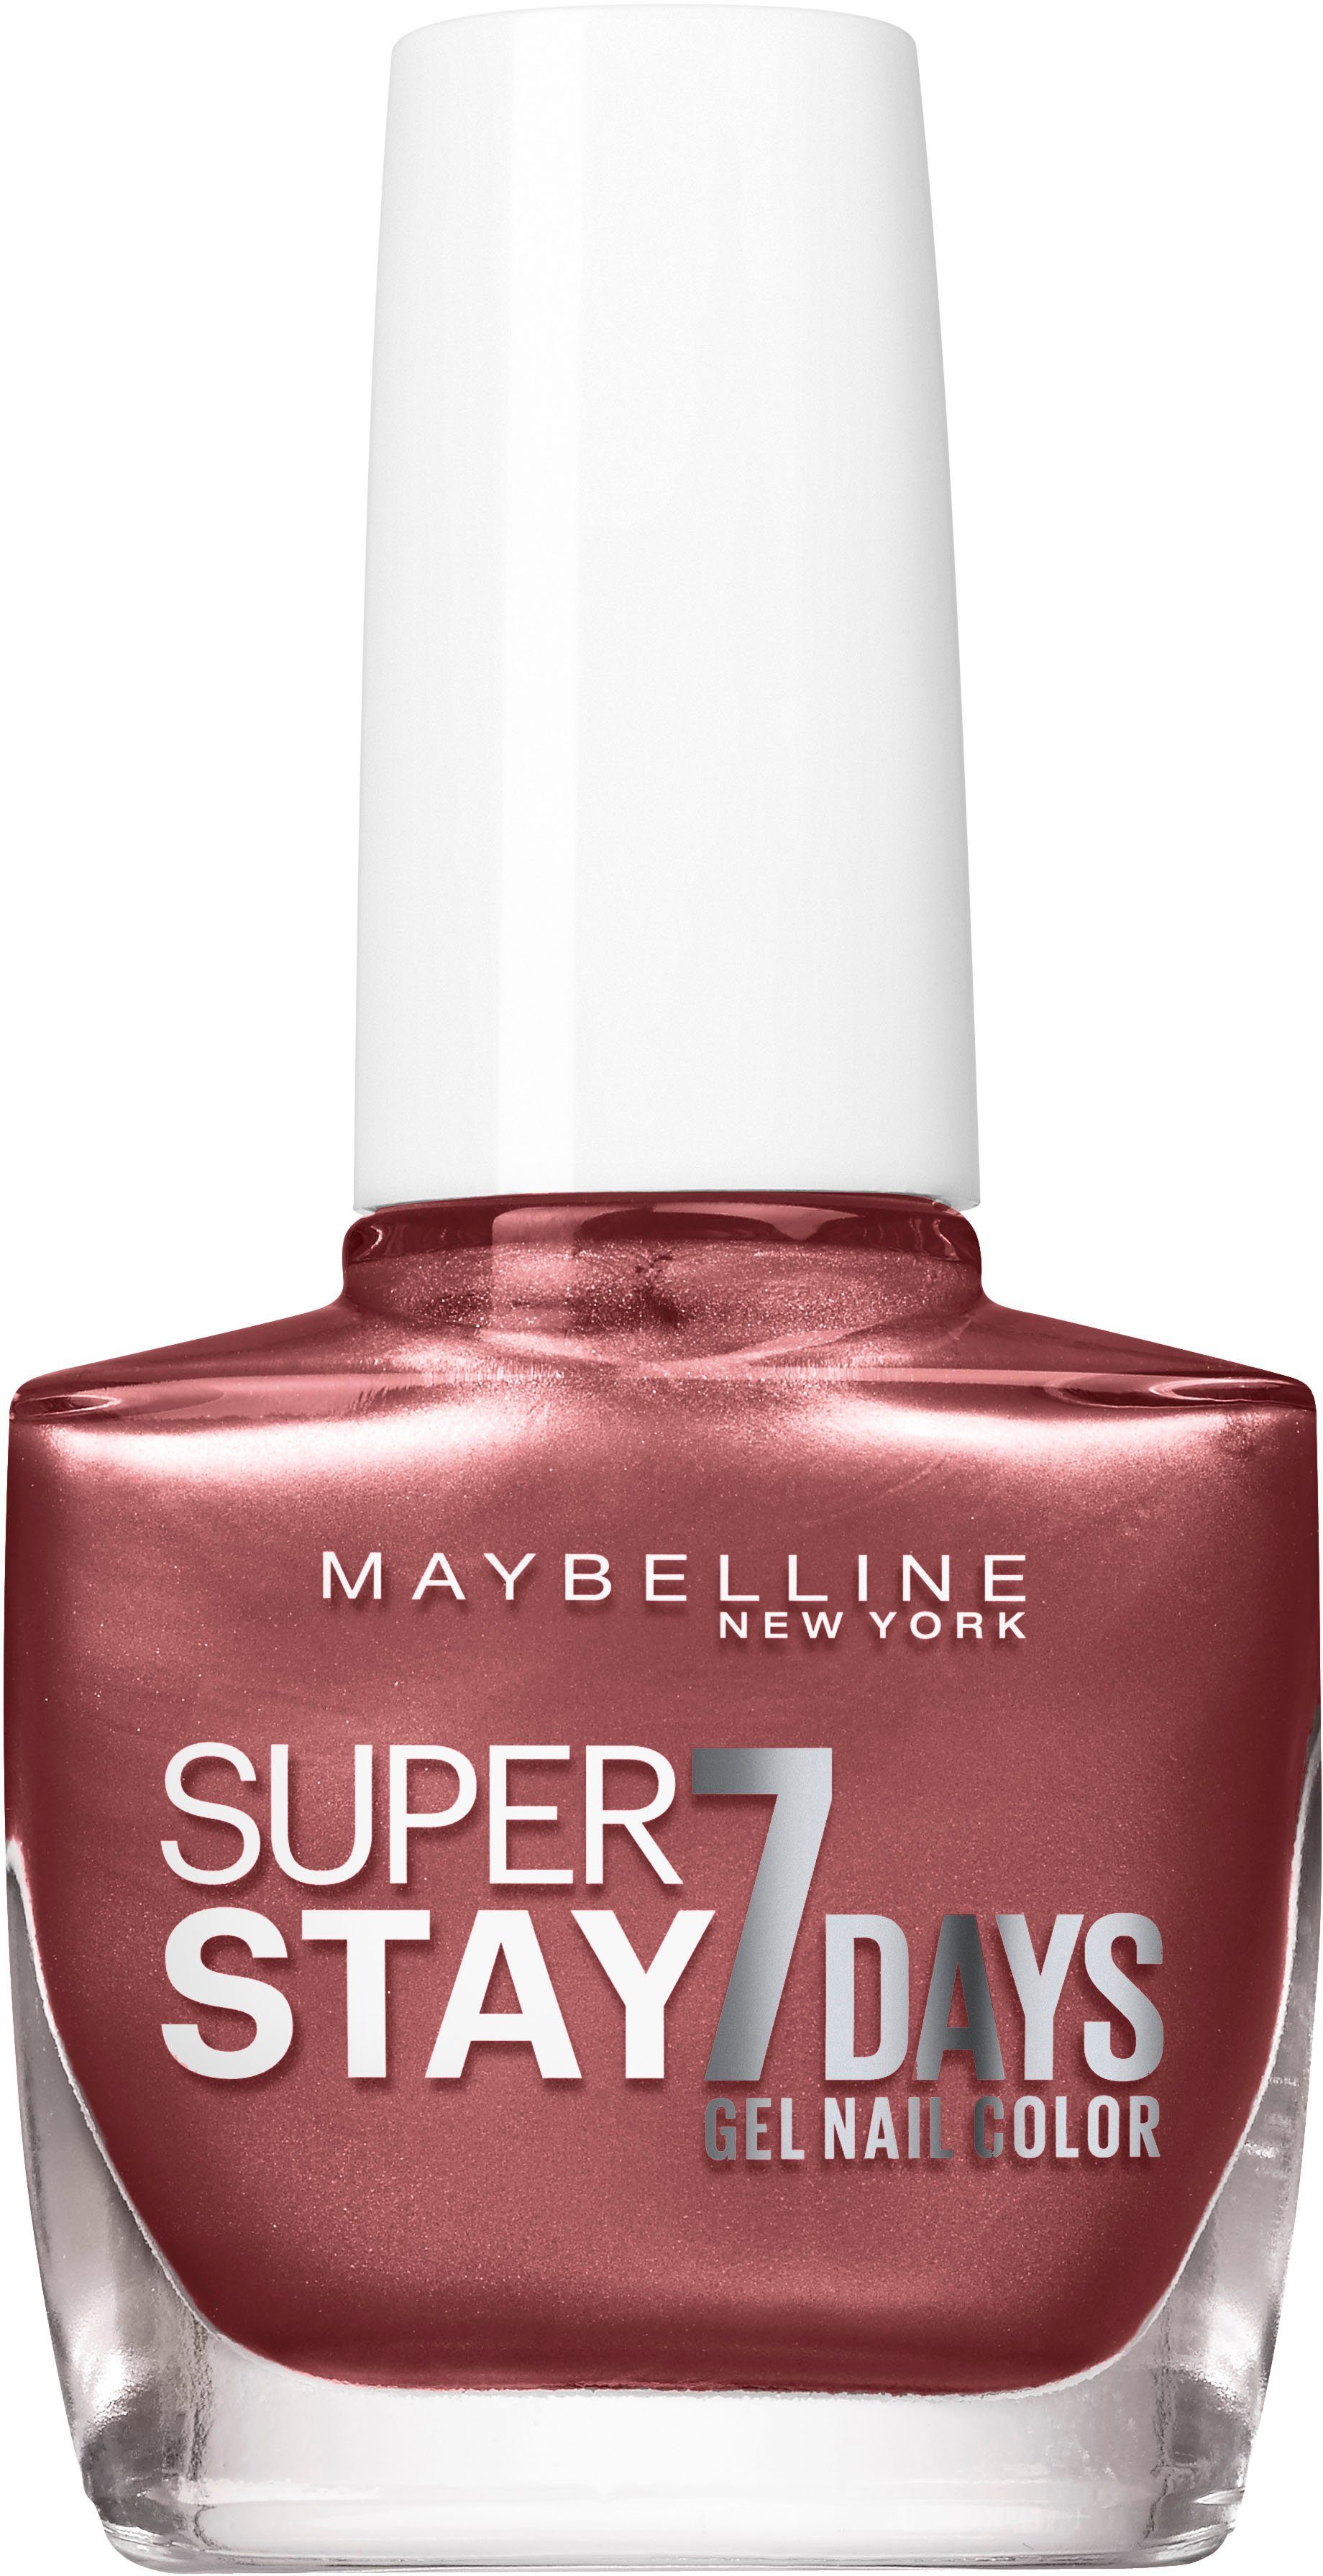 MAYBELLINE NEW YORK Nagellack Rooftop Days Shade 912 7 Superstay